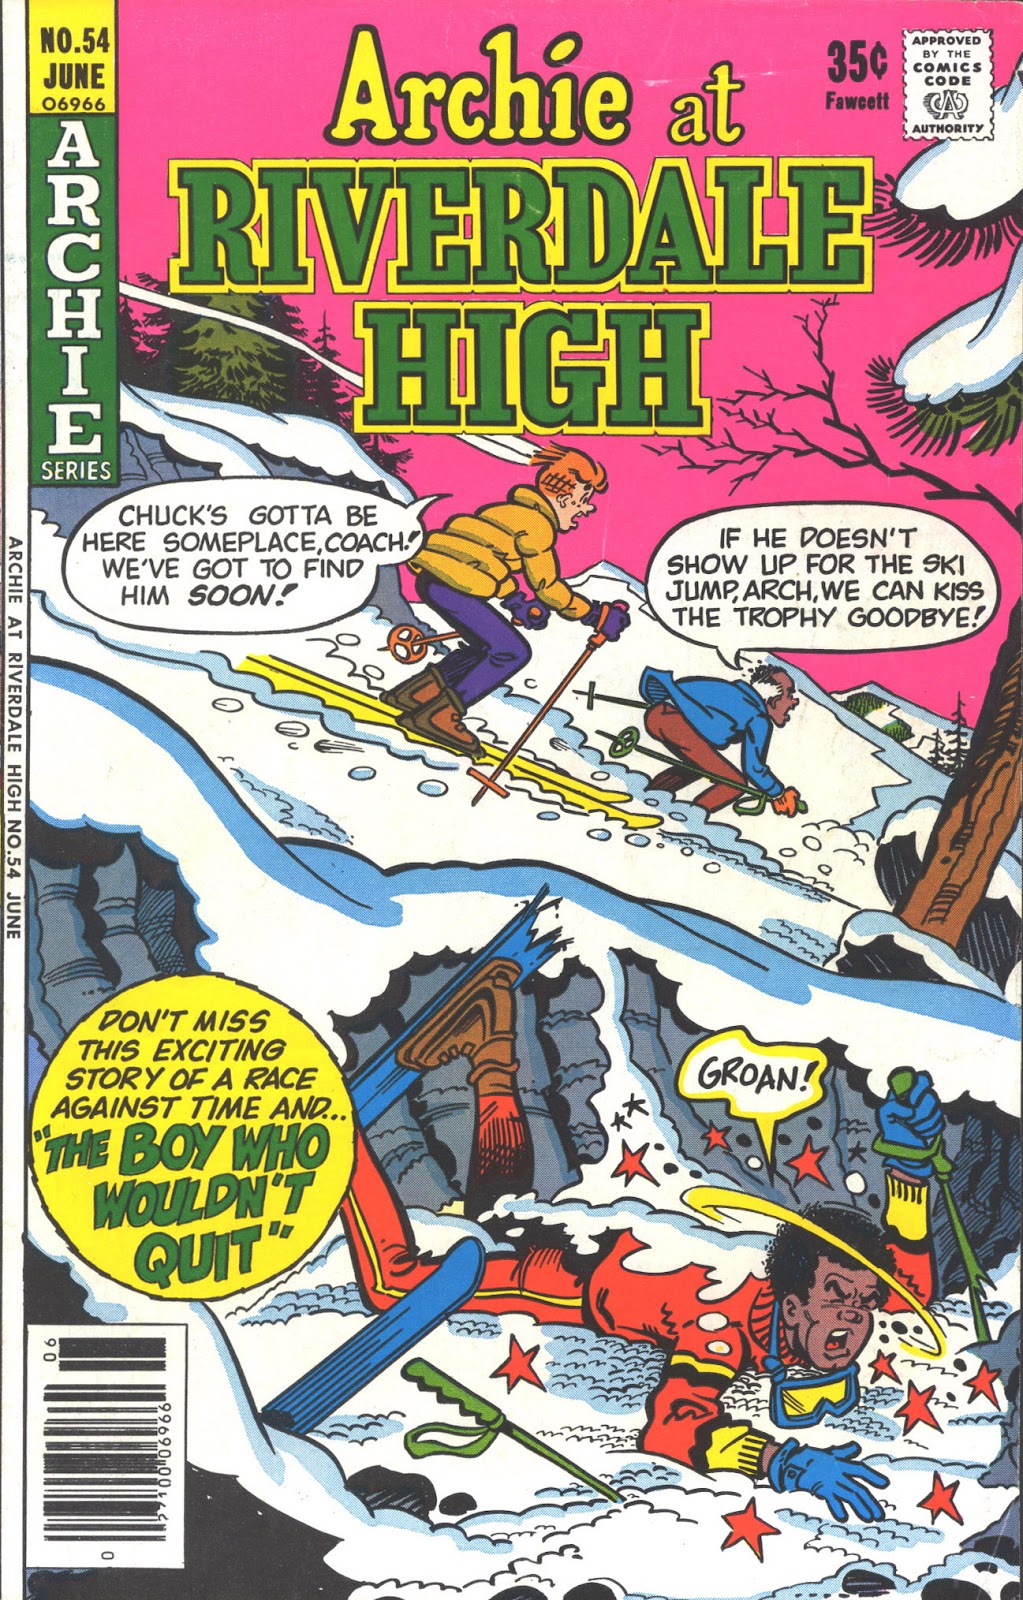 Archie at Riverdale High (1972) issue 54 - Page 1